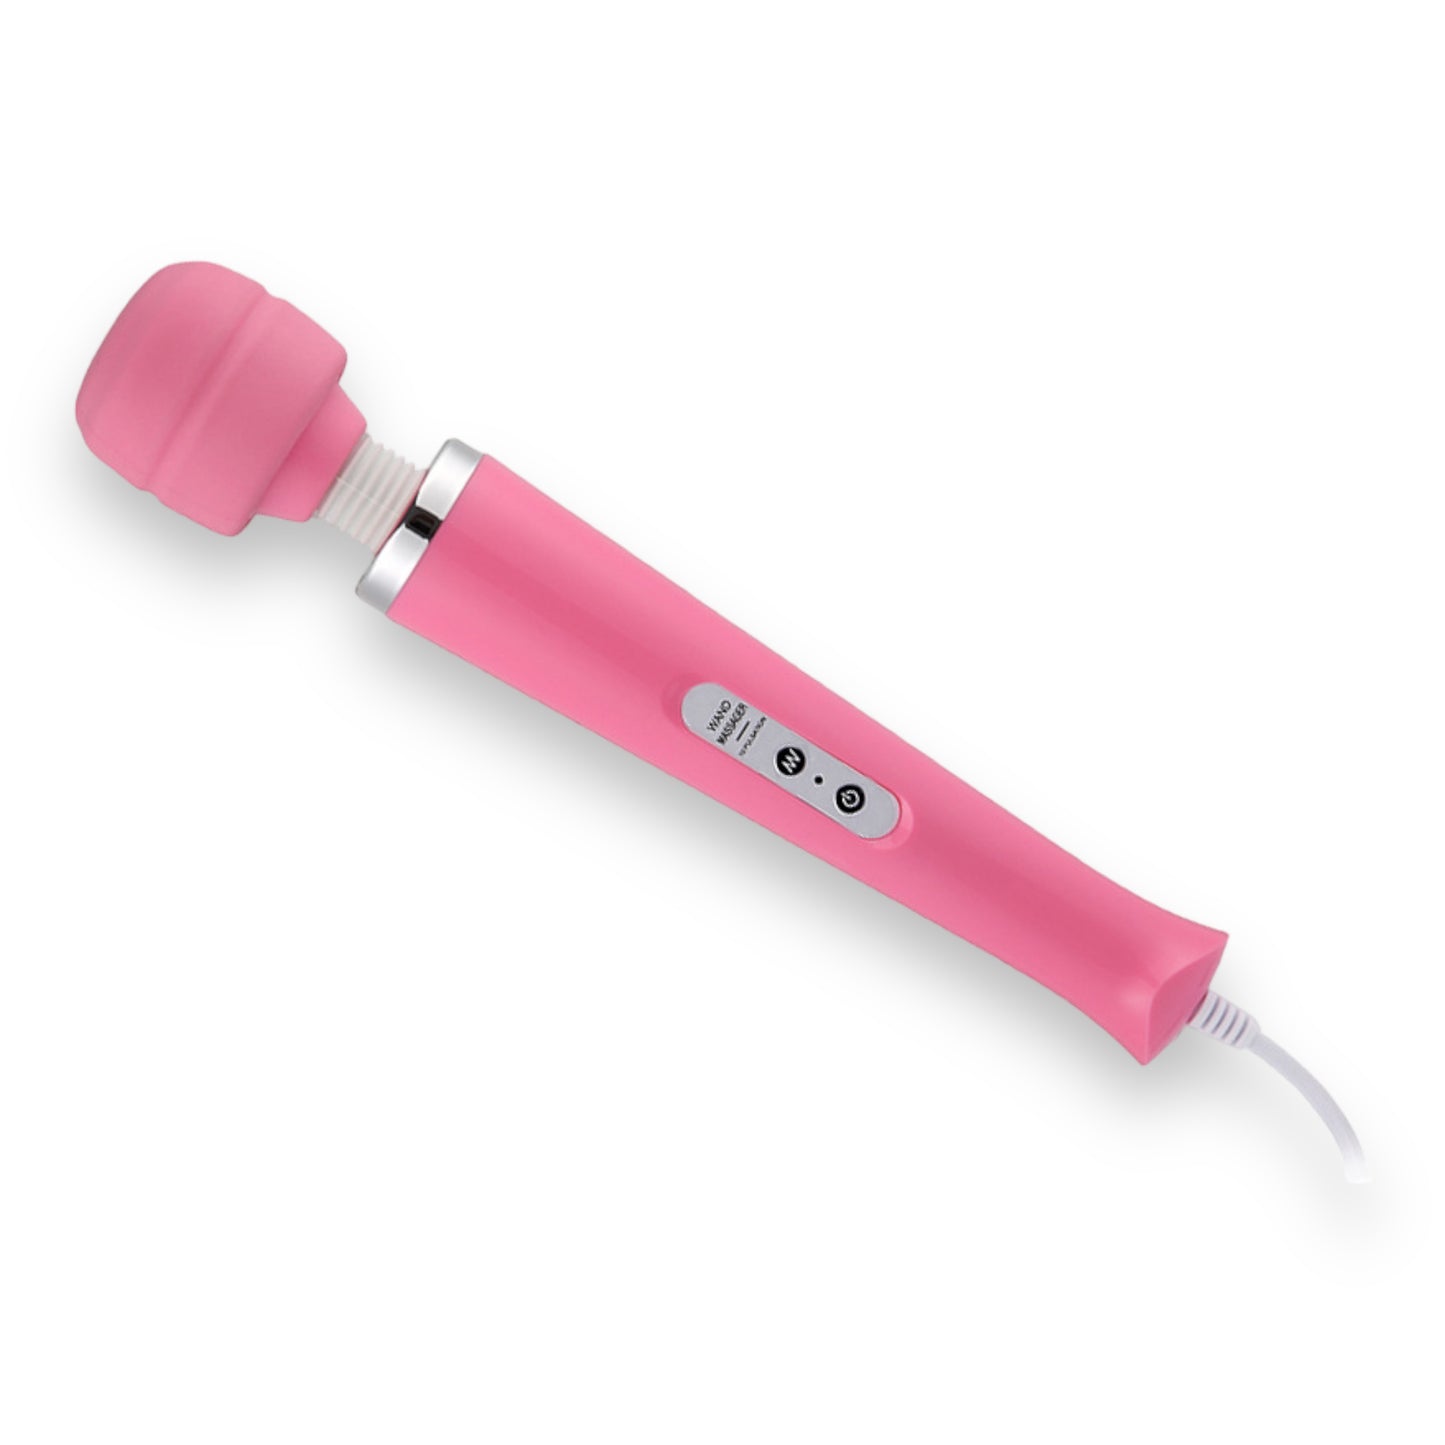 Power Escorts - BR16 - Power Wand Massager - 12-Speed - WIRED - 4 Colours